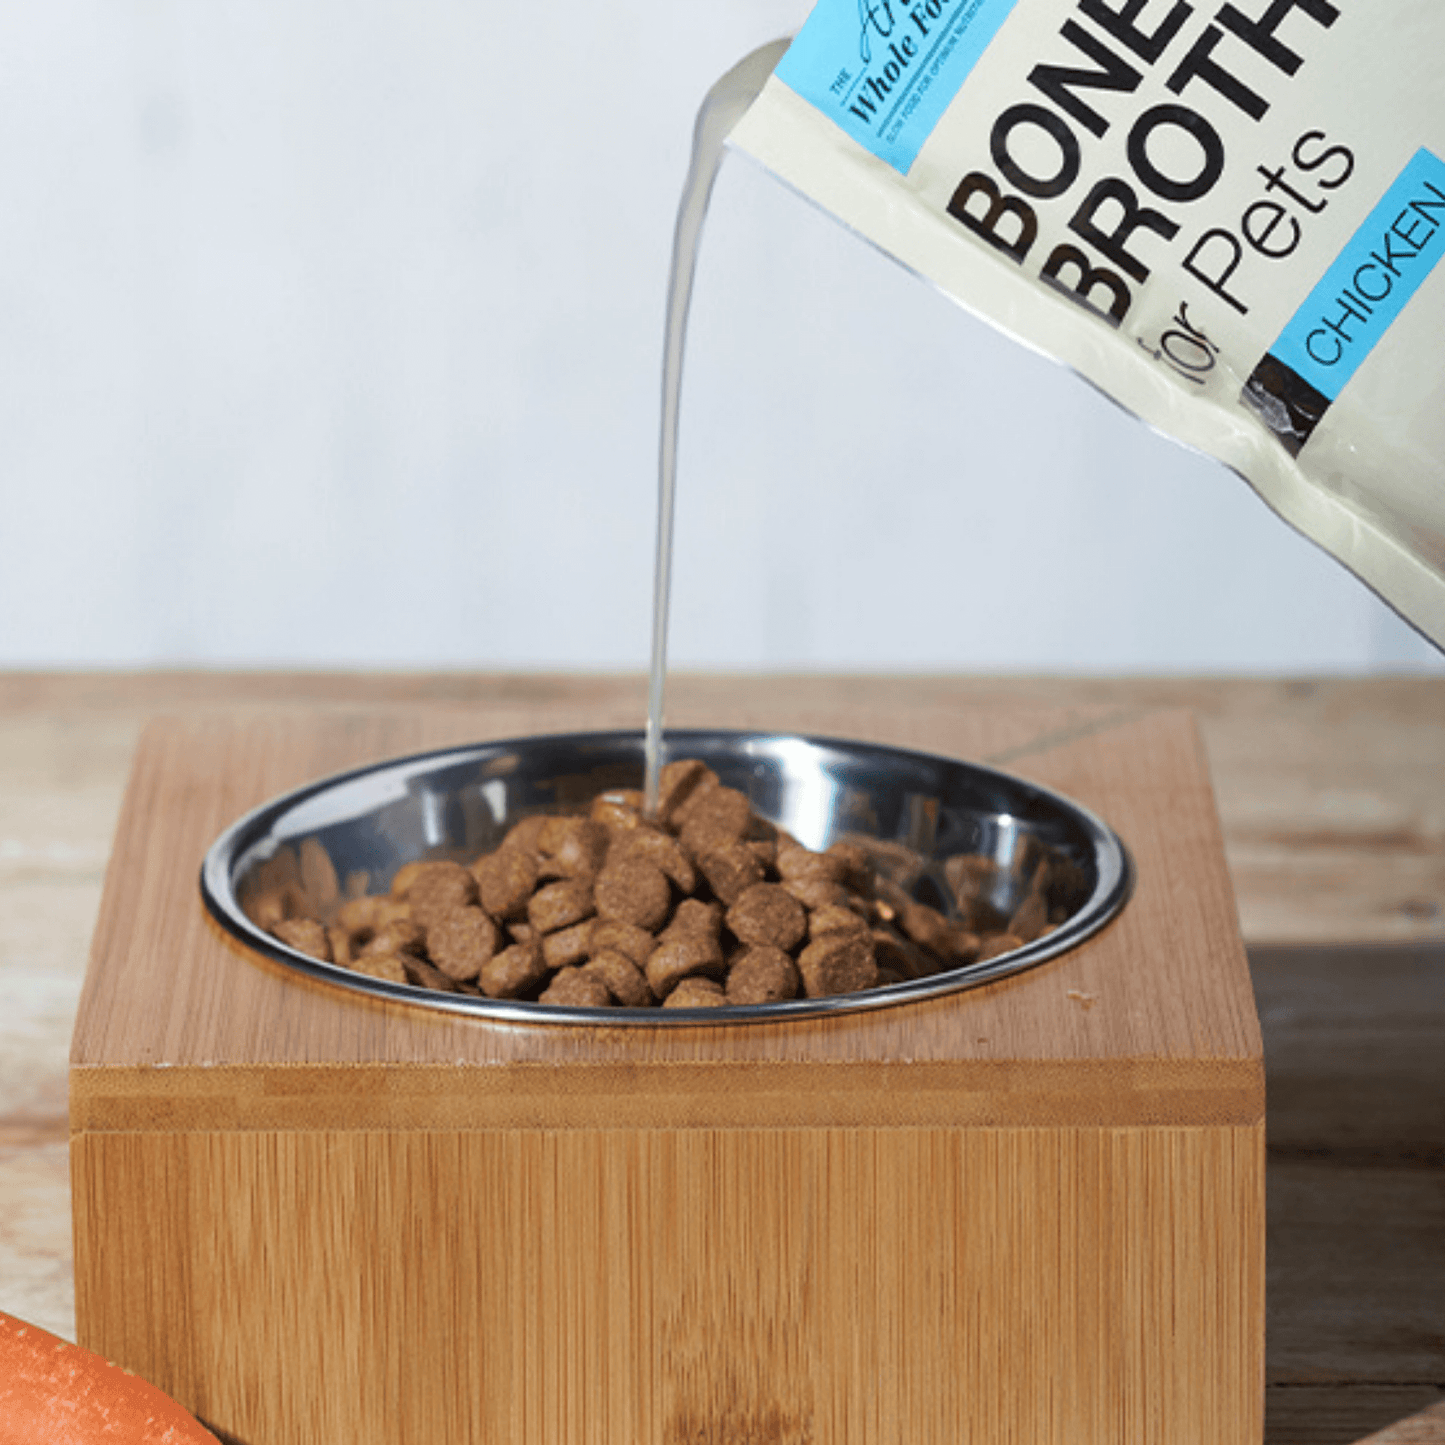 Chicken broth healthy dog treat, Australia wide, Let's pawty